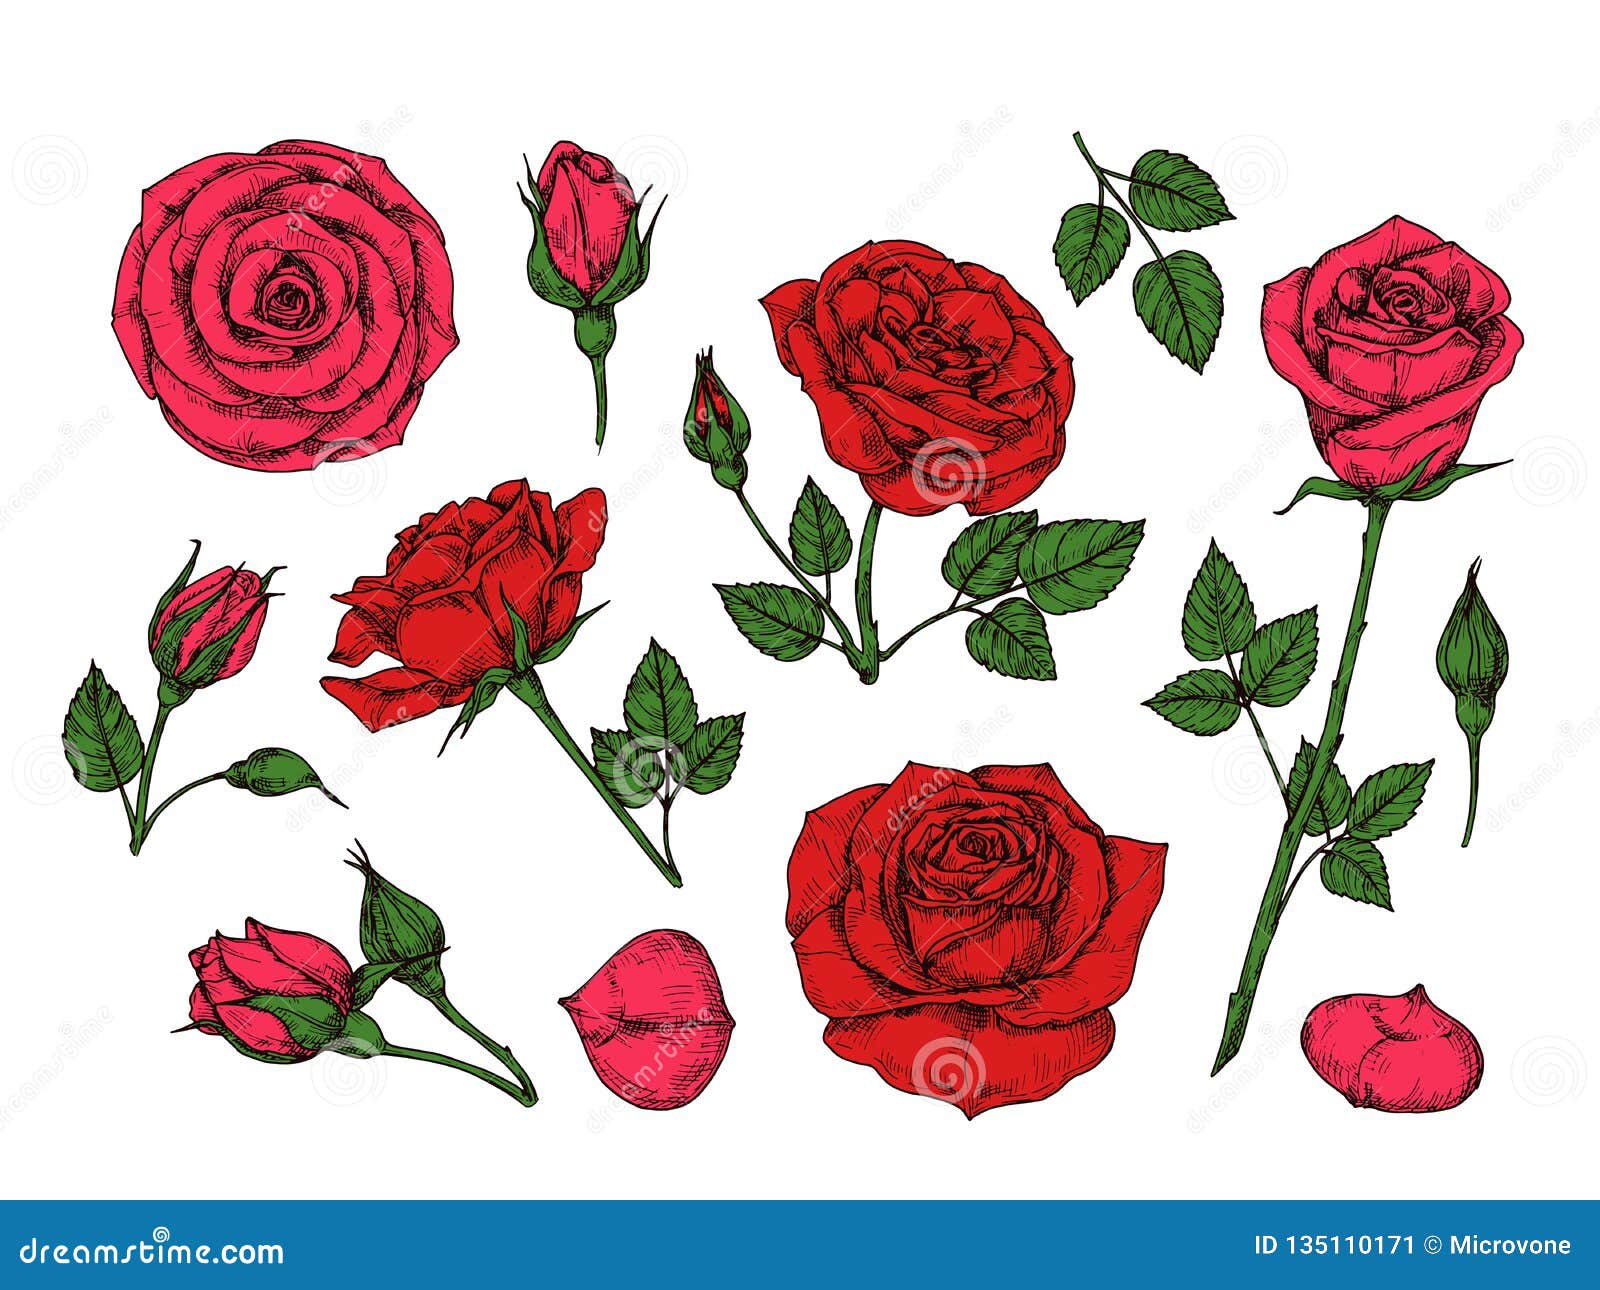 Rose bush illustration Cut Out Stock Images & Pictures - Alamy